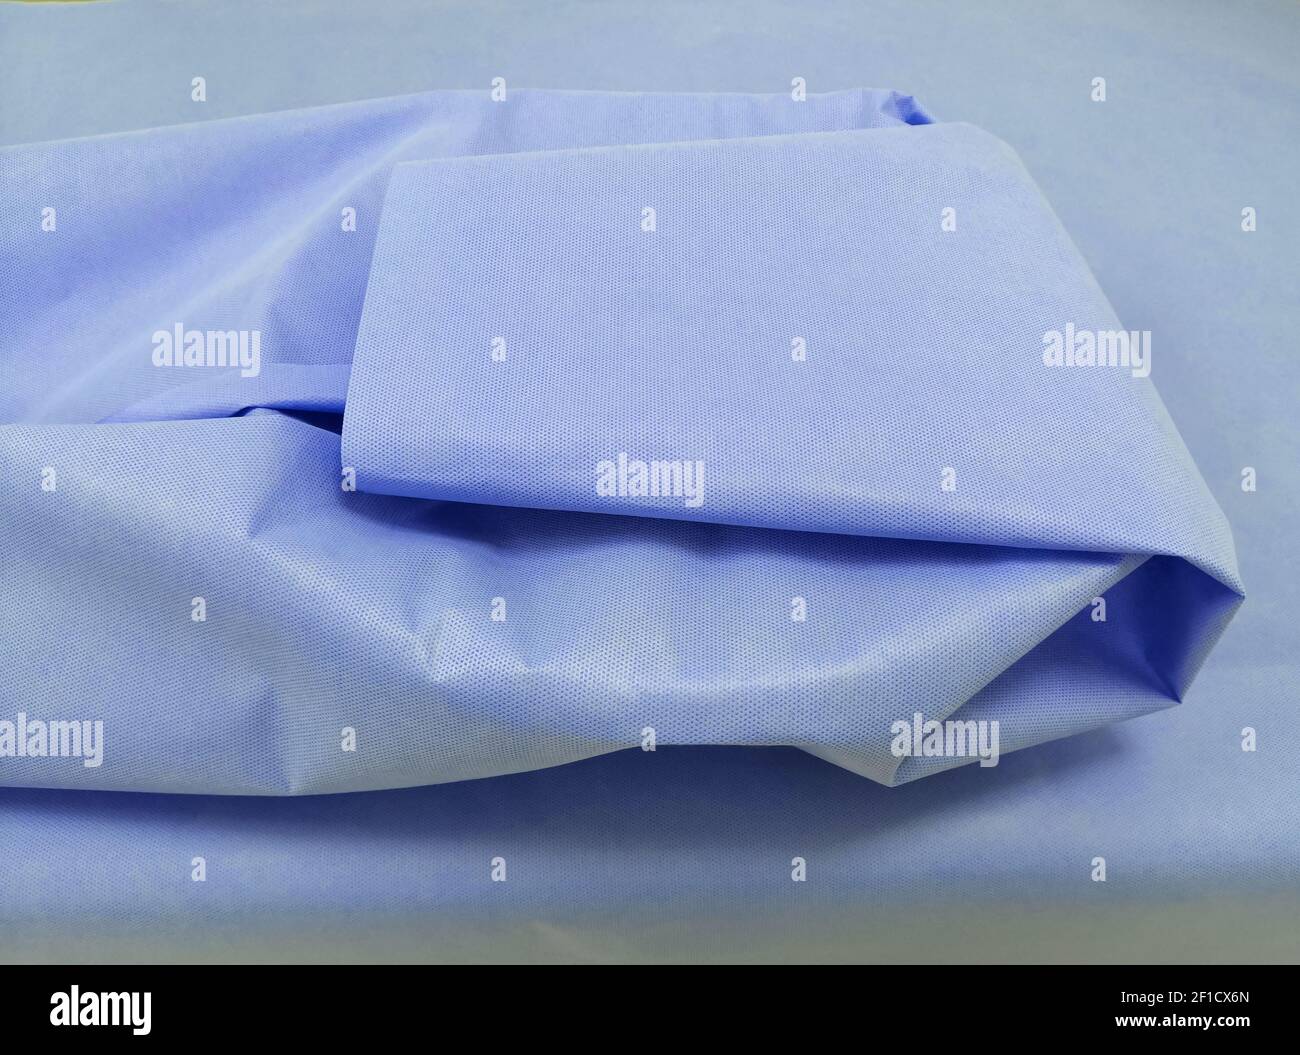 Packing Of Surgical Instrument With Sterilization Blue Drape Sheet. Selective Focus Stock Photo